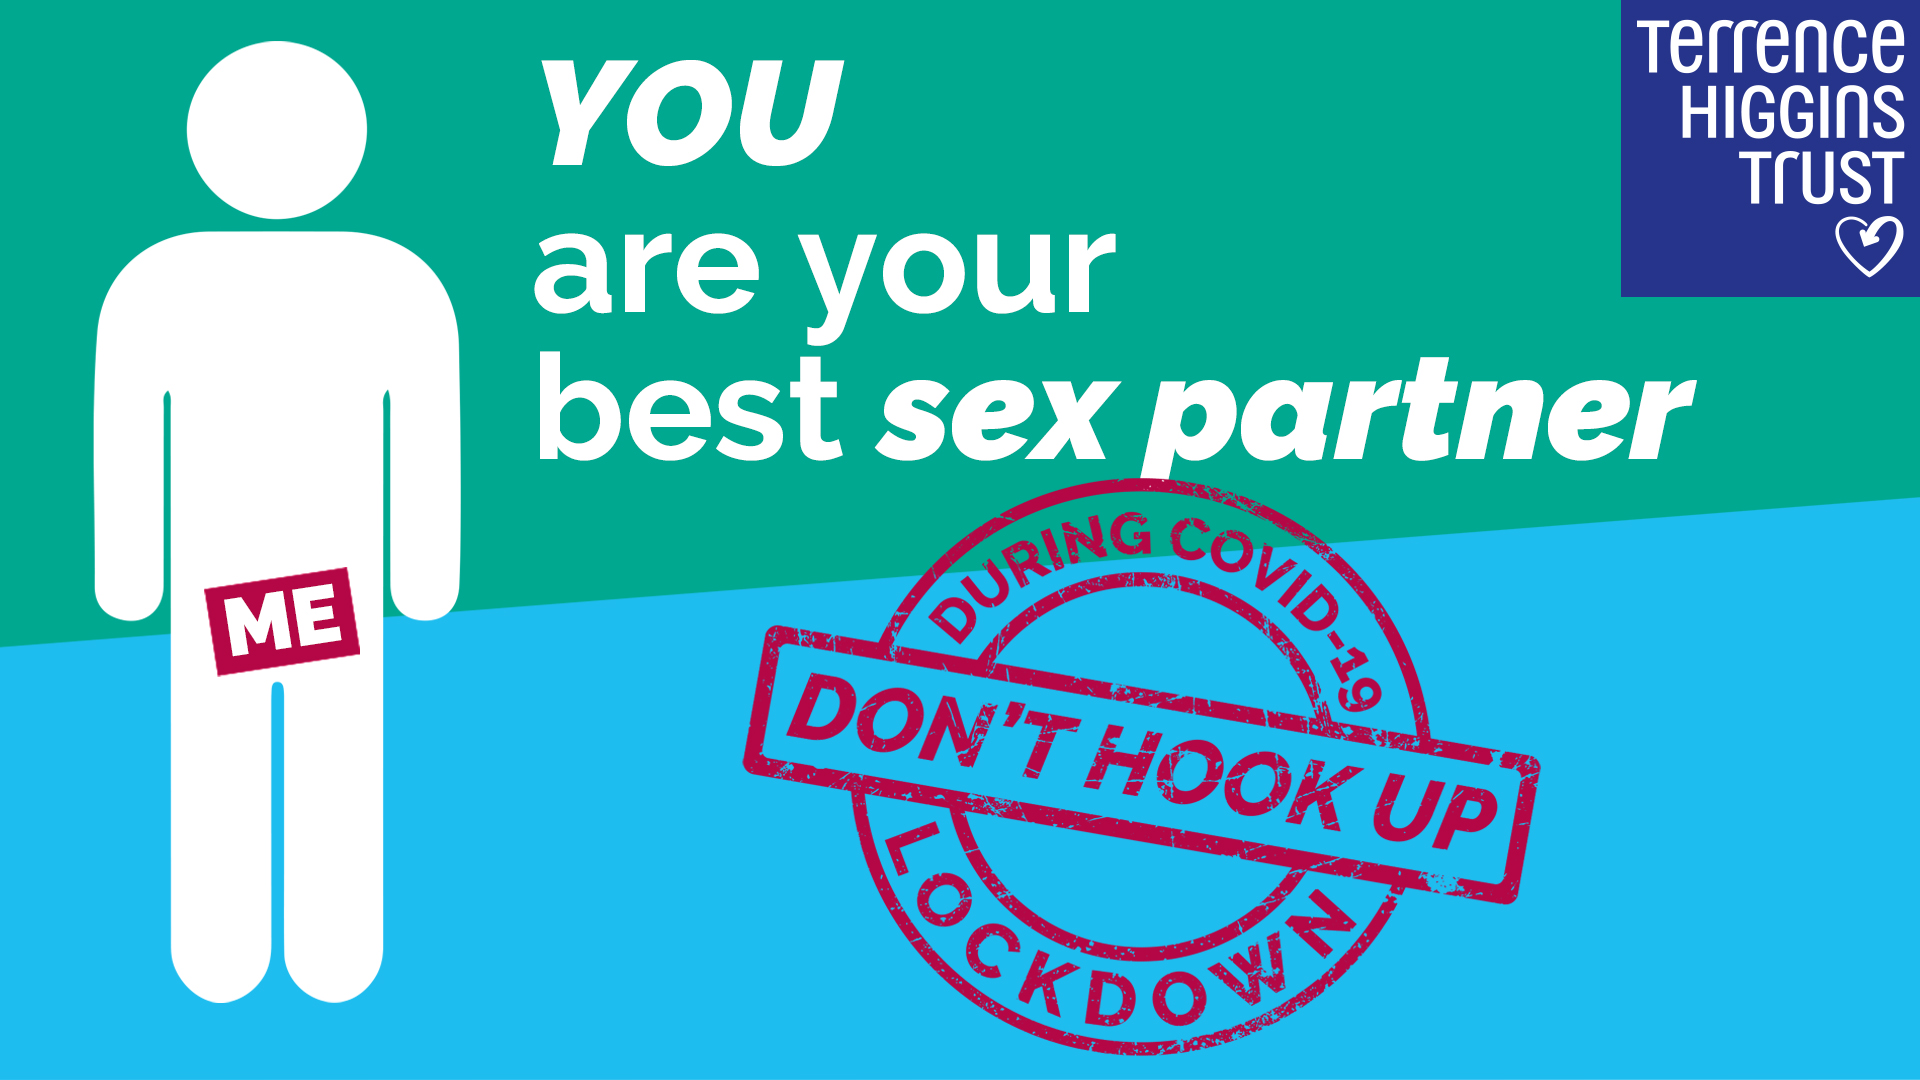 THT's Dr Michael Brady has urged people to stop hooking up during the lockdown